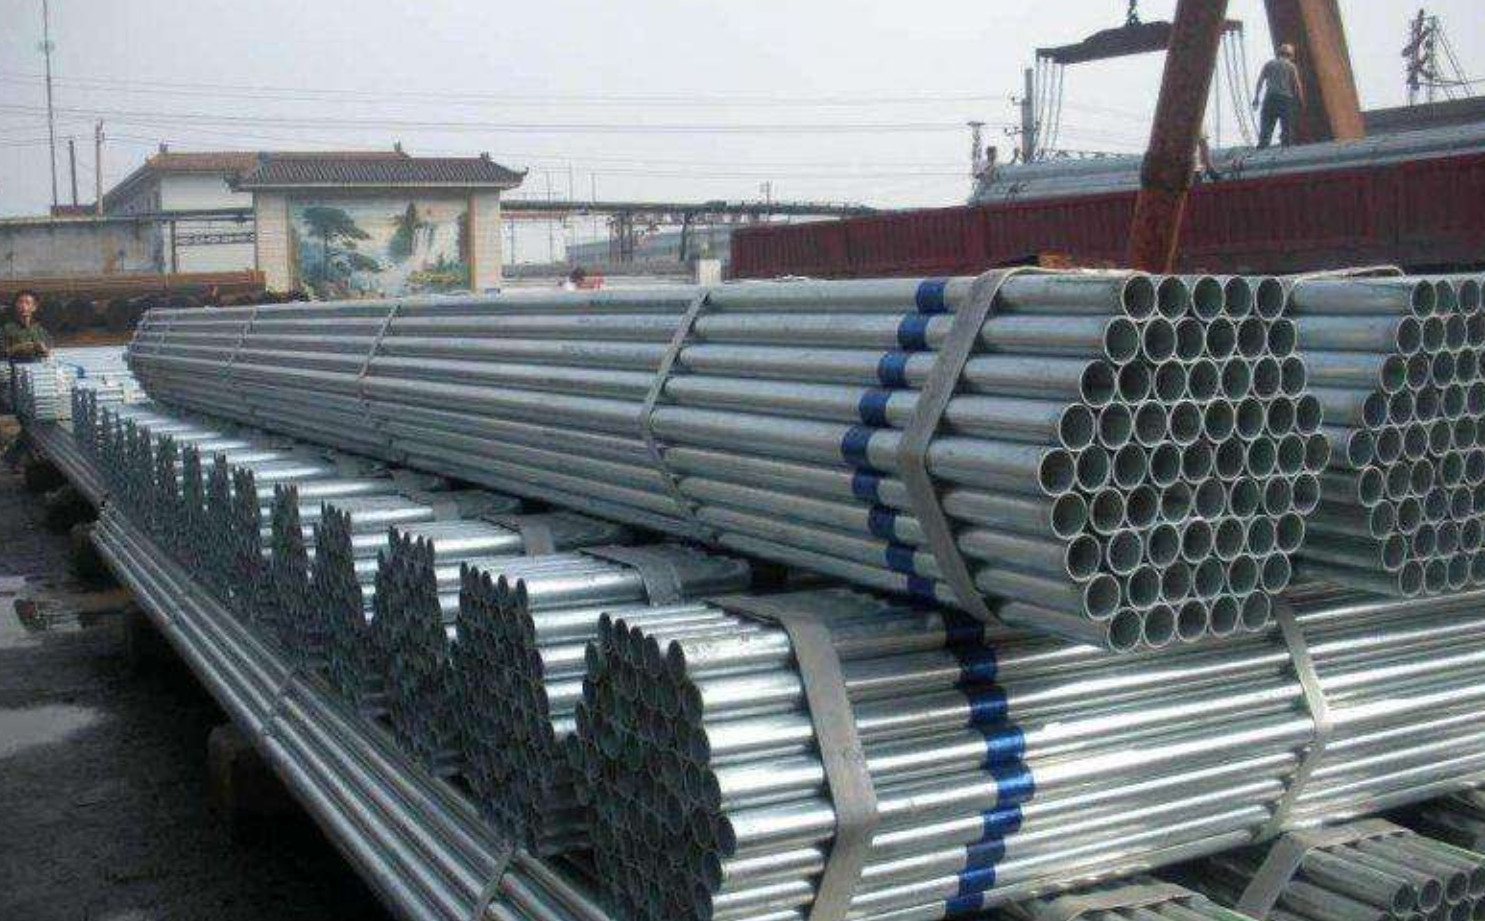 Wholesale ASTM BS Black Tube Gi Galvanized Steel Pipe/galvanized steel structural pipe/EN 10255 galvanized square pipe/Welded pipe from china suppliers